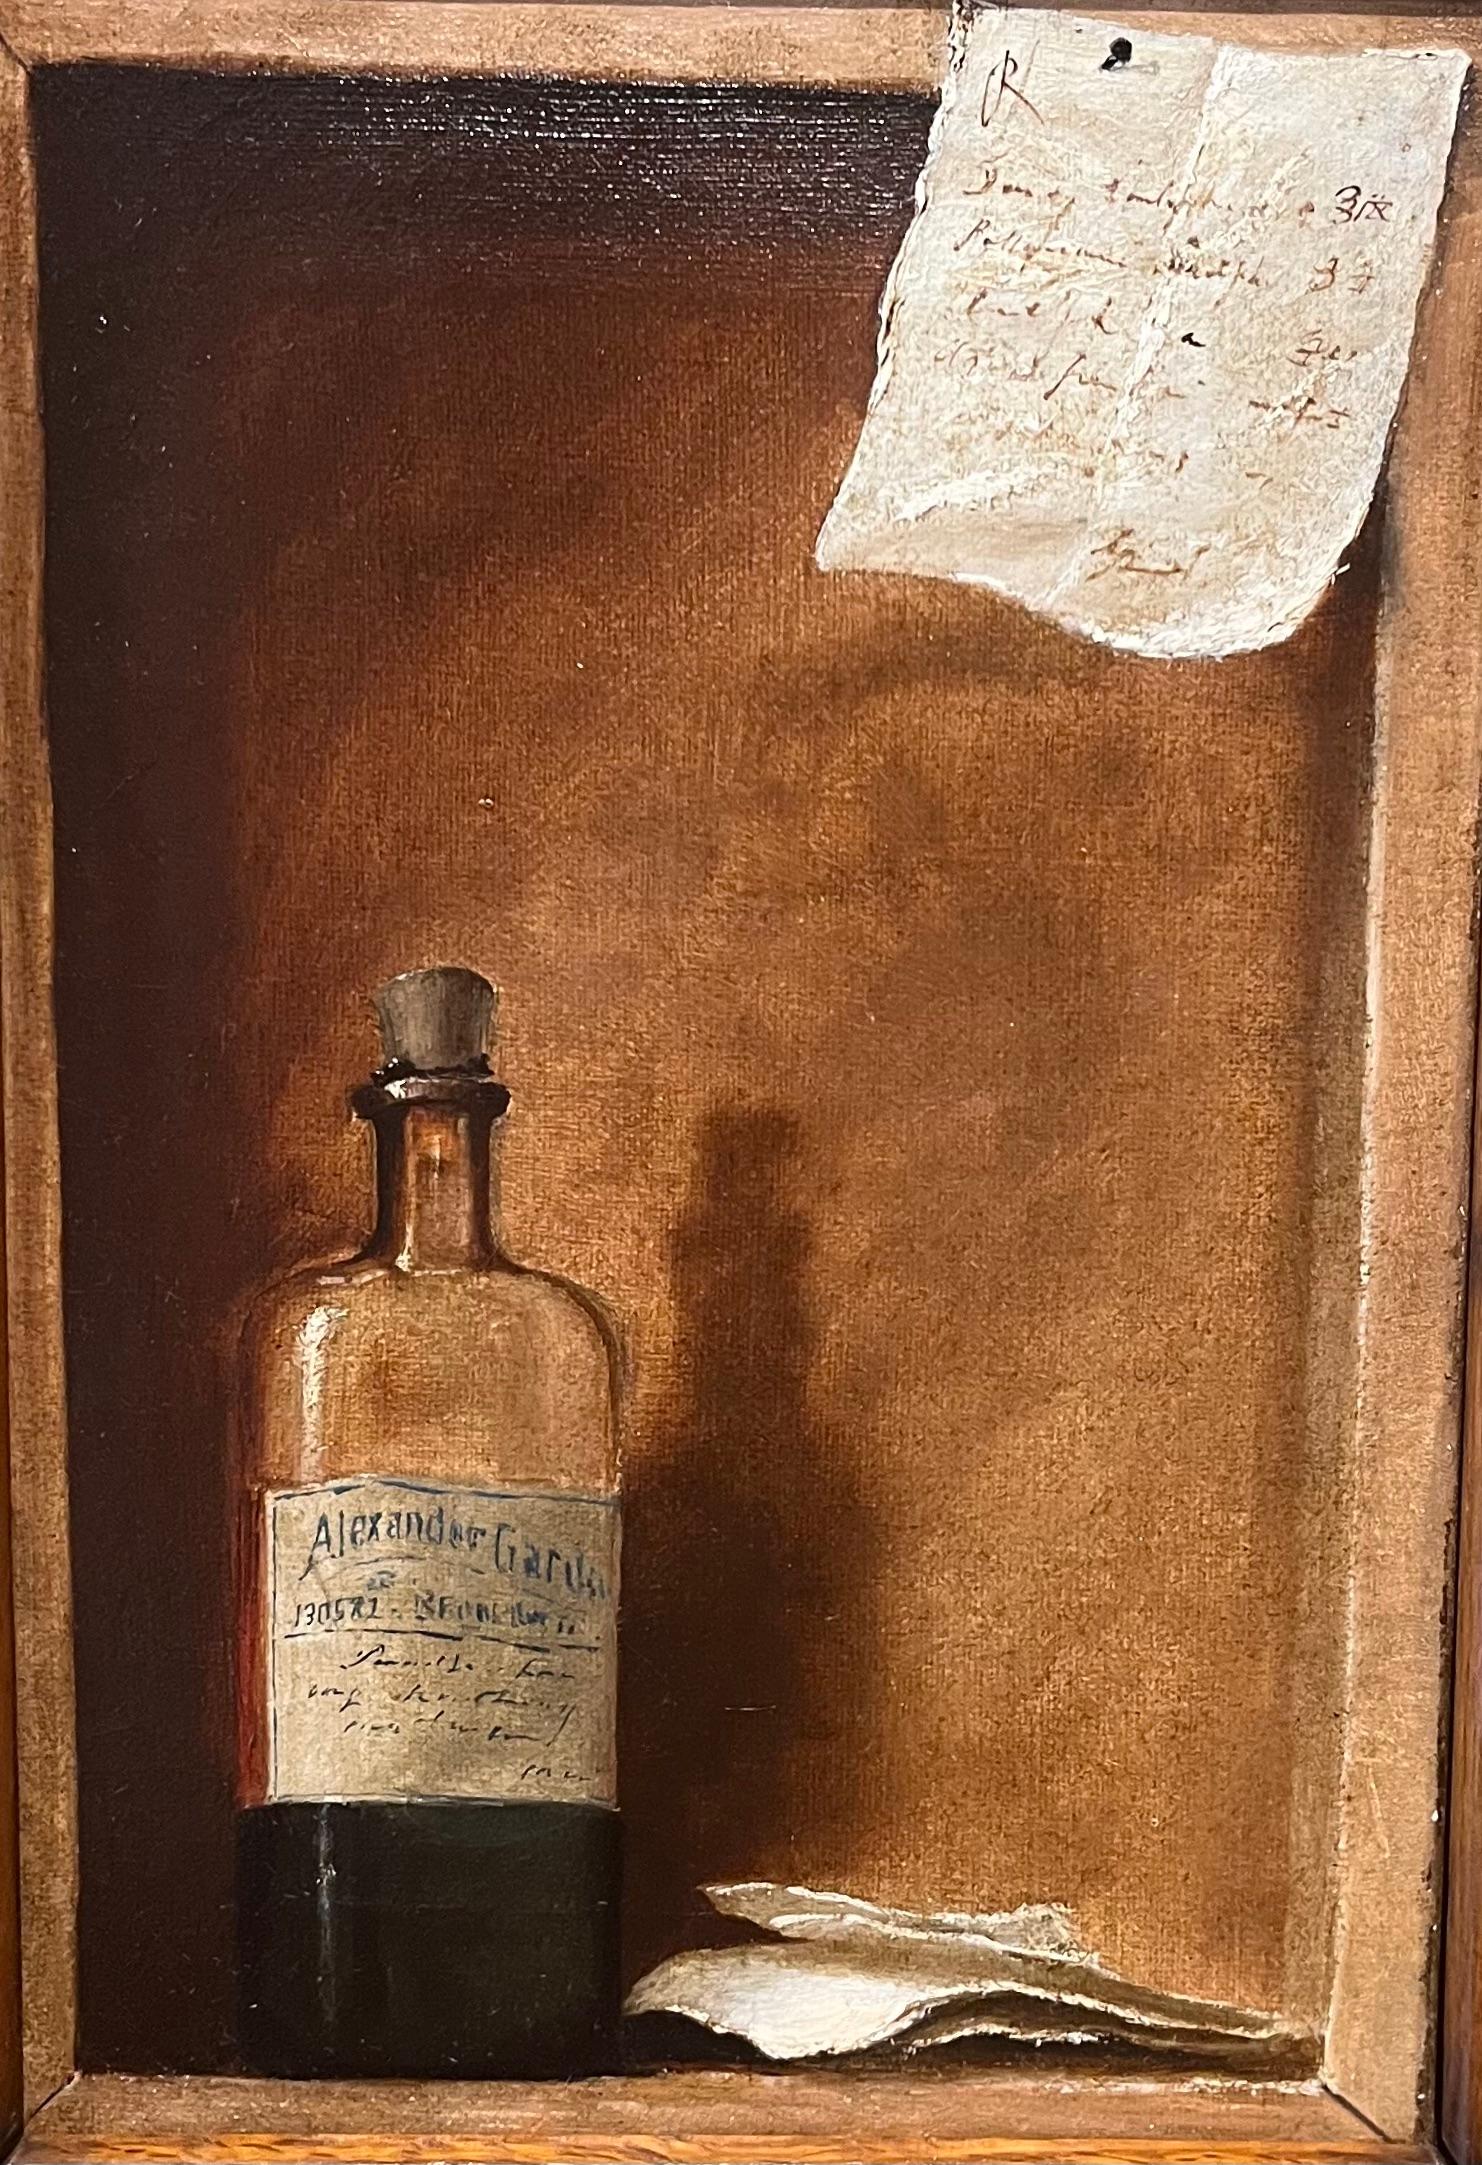 Trompe L'oeil painting of bottle and letter. This work is by an American School artist, unsigned. This artist possesses a mastery of the skills needed to complete such a distinct art movement like this one. The Trompe L'oeil movement is known for